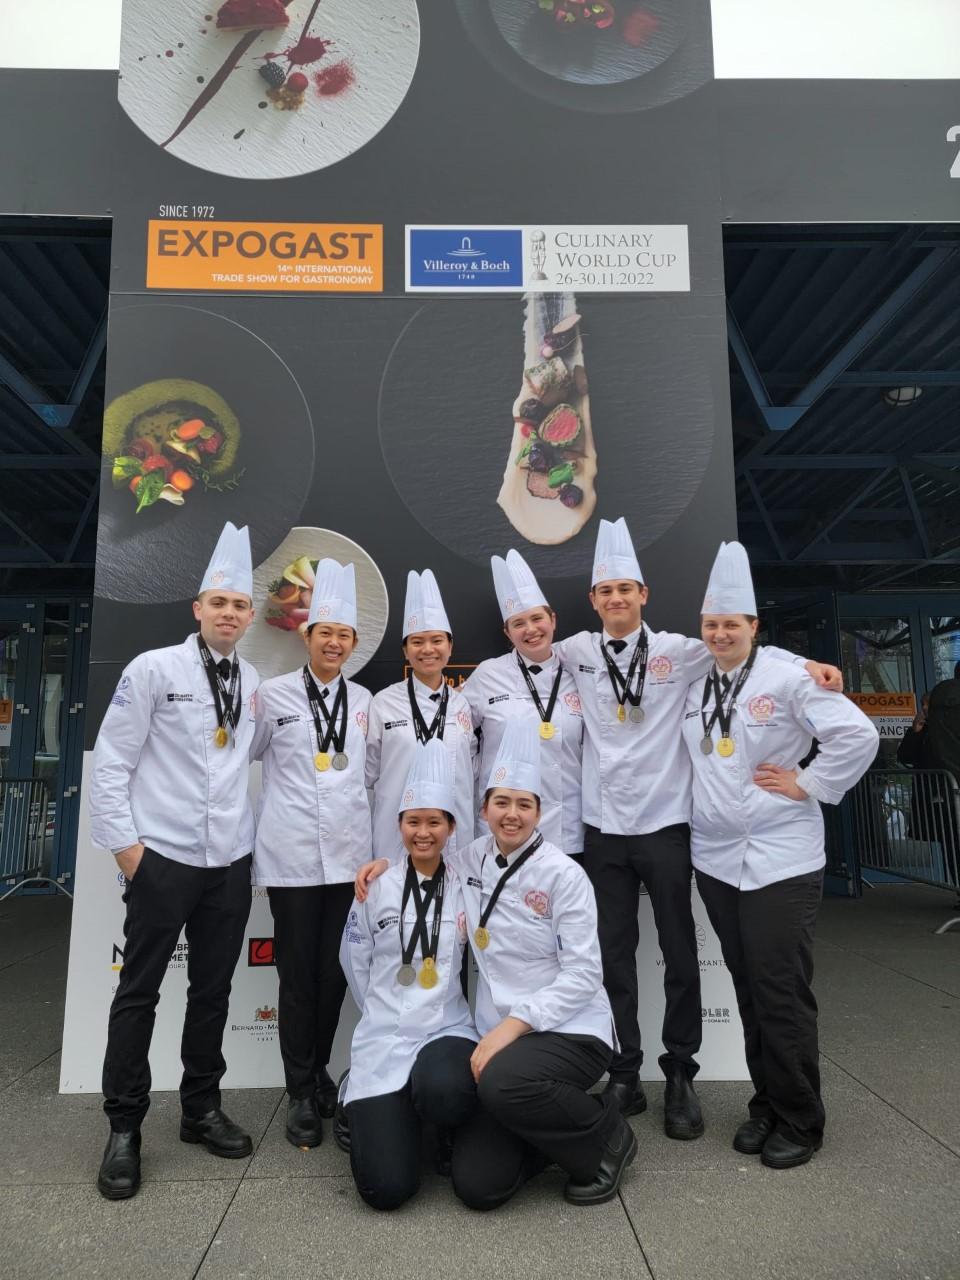 A group of eight people wearing chef’s uniforms with gold and silver medals around their necks.